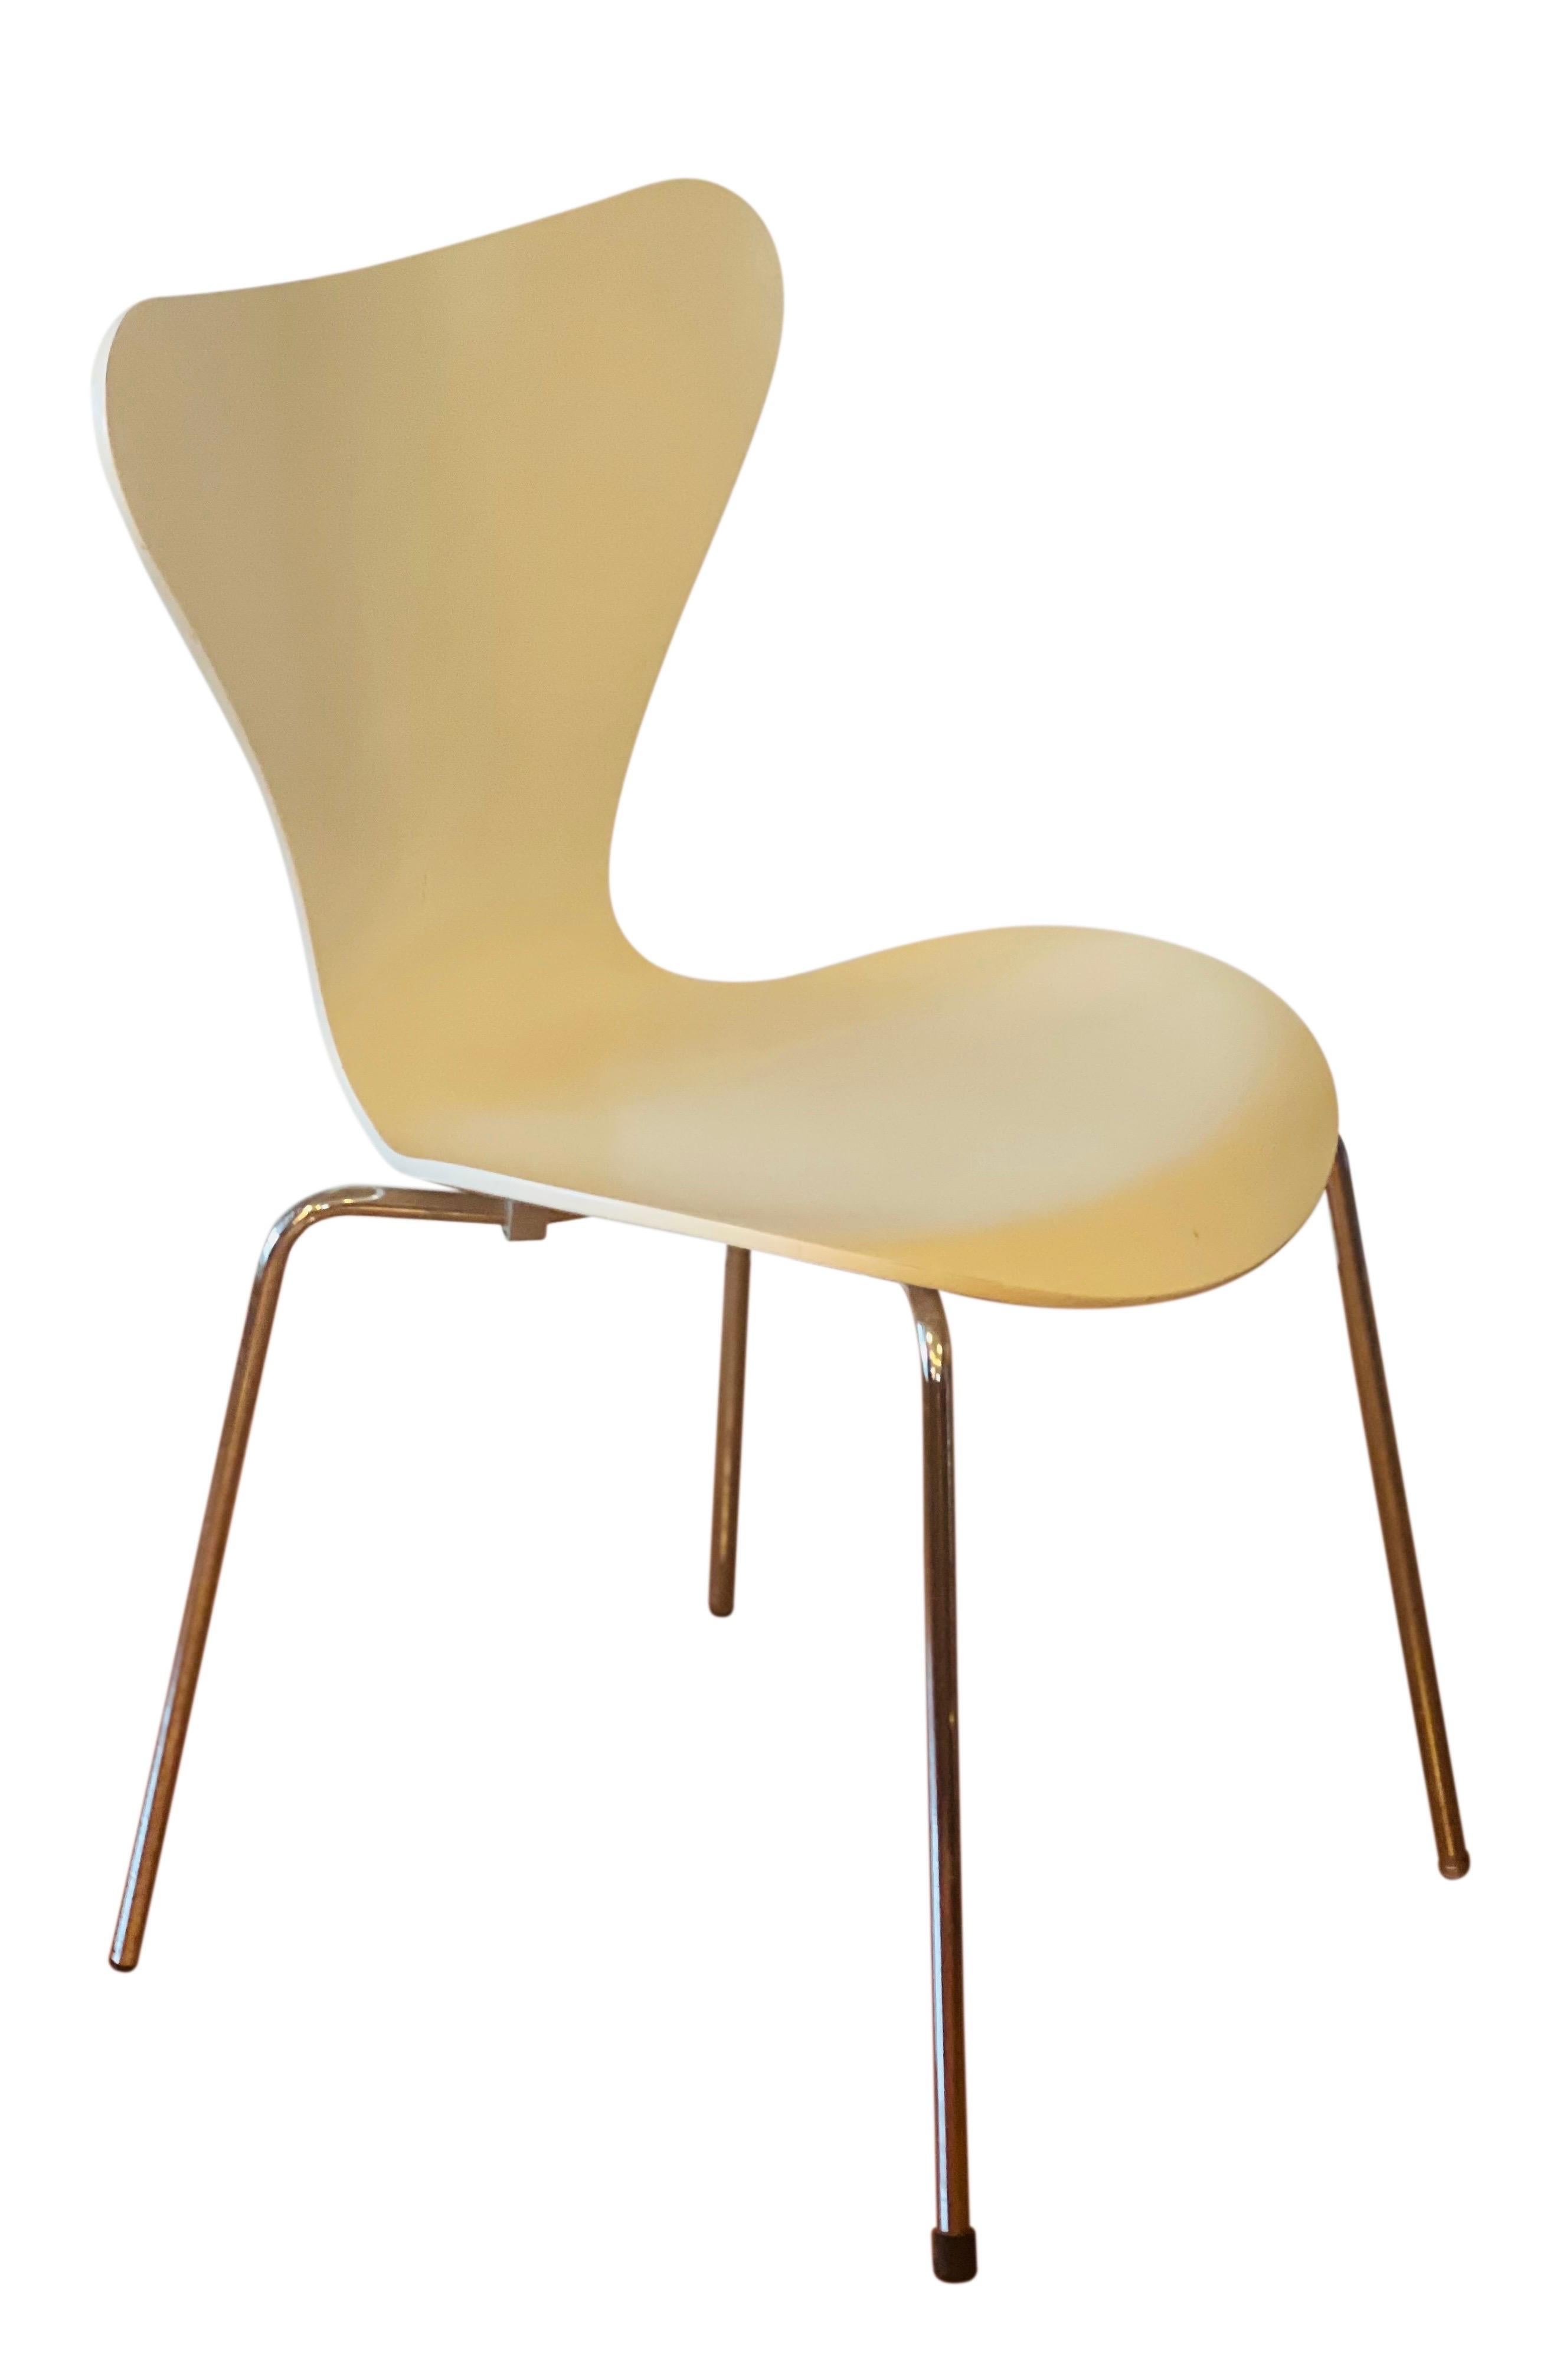 Arne Jacobsen for Fritz Hansen iconic Series 7 chairs, 1996, Denmark.  Designed in 1955,  set of (4) Danish modern stackable molded plywood chairs with chromed steel legs in original white.  All chairs have maker's mark.  

